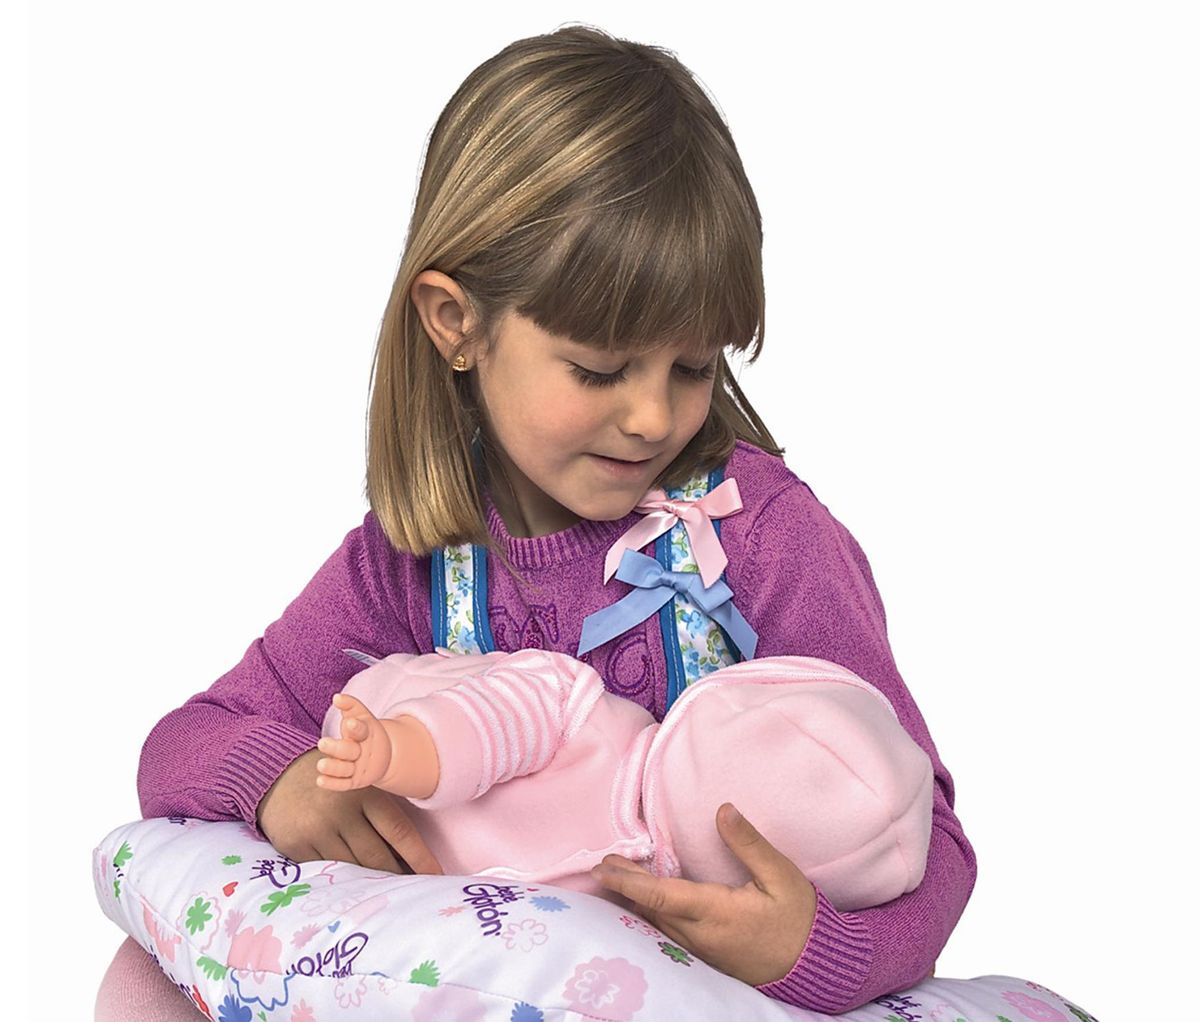 This product image released by Berjuan Toys shows  a girl playing with The Breast Milk Baby doll. The breastfeeding doll, whose suckling sounds are prompted by sensors sewn into a halter top, has caught some flak after hitting the U.S. market. (Berjuan Toys)